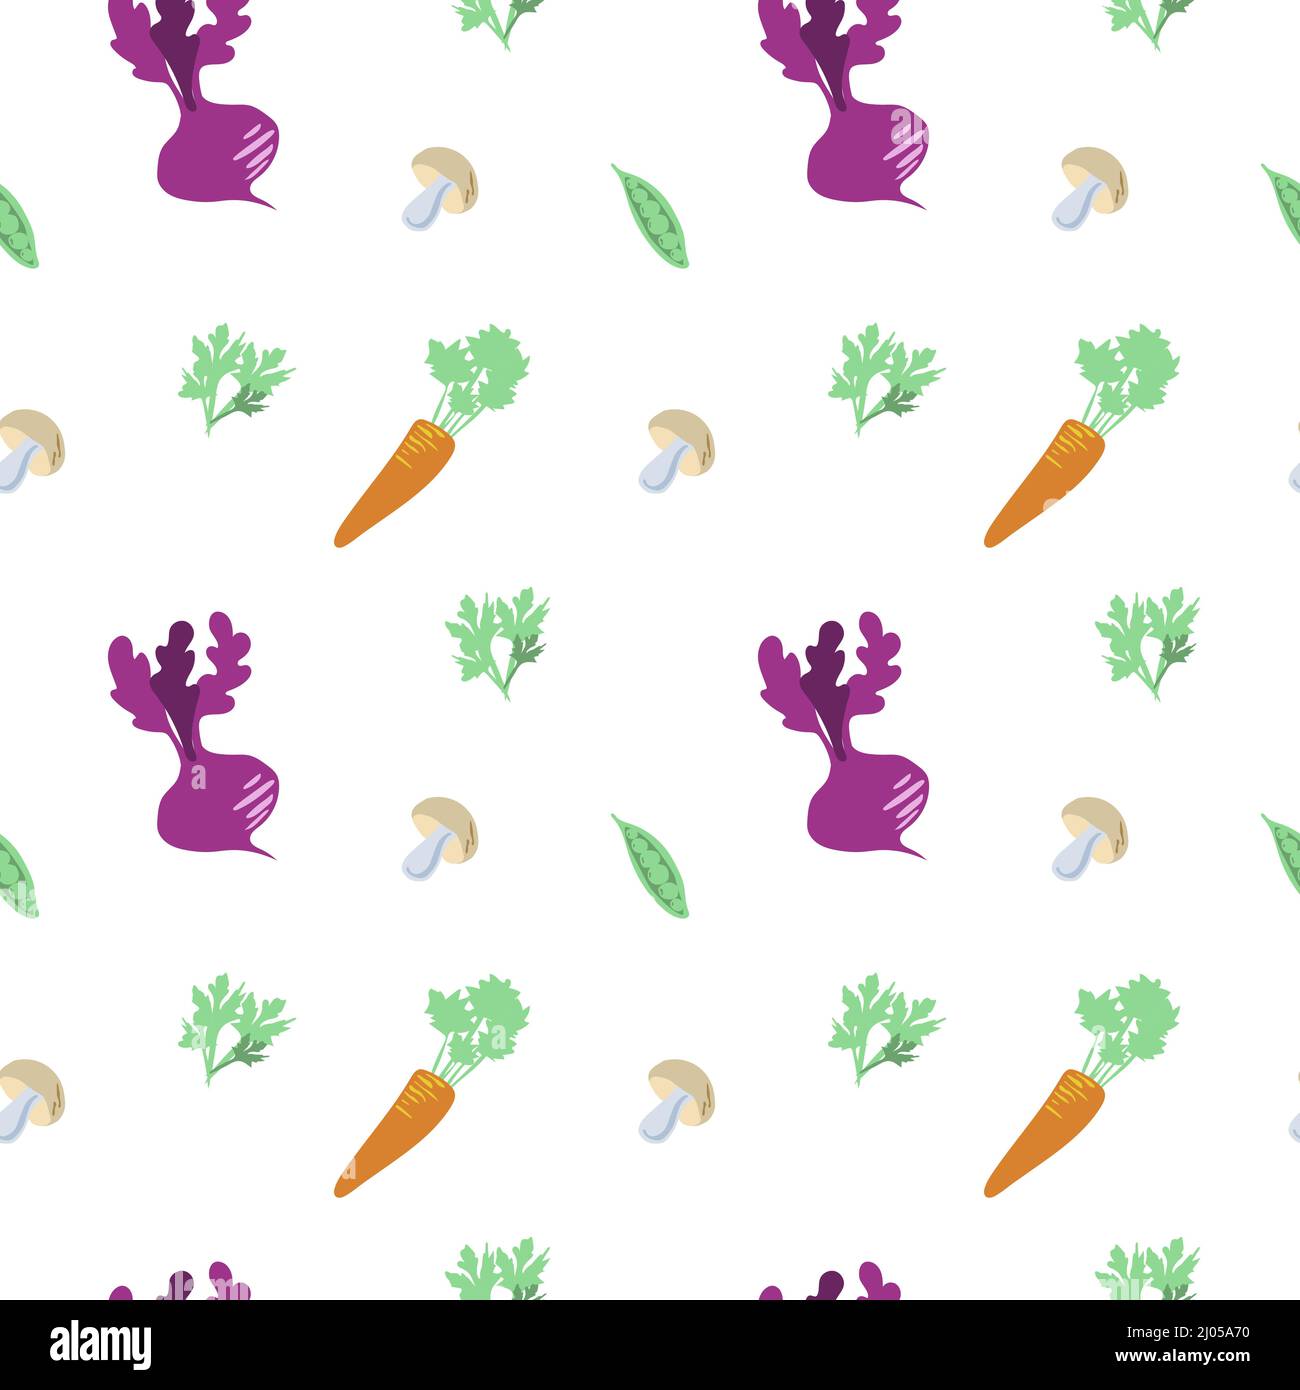 Seamless pattern of vegetables, mushrooms and greens on white background. Elements in a flattened style. World Food Day. Vegetables and greens. Beets, Stock Vector